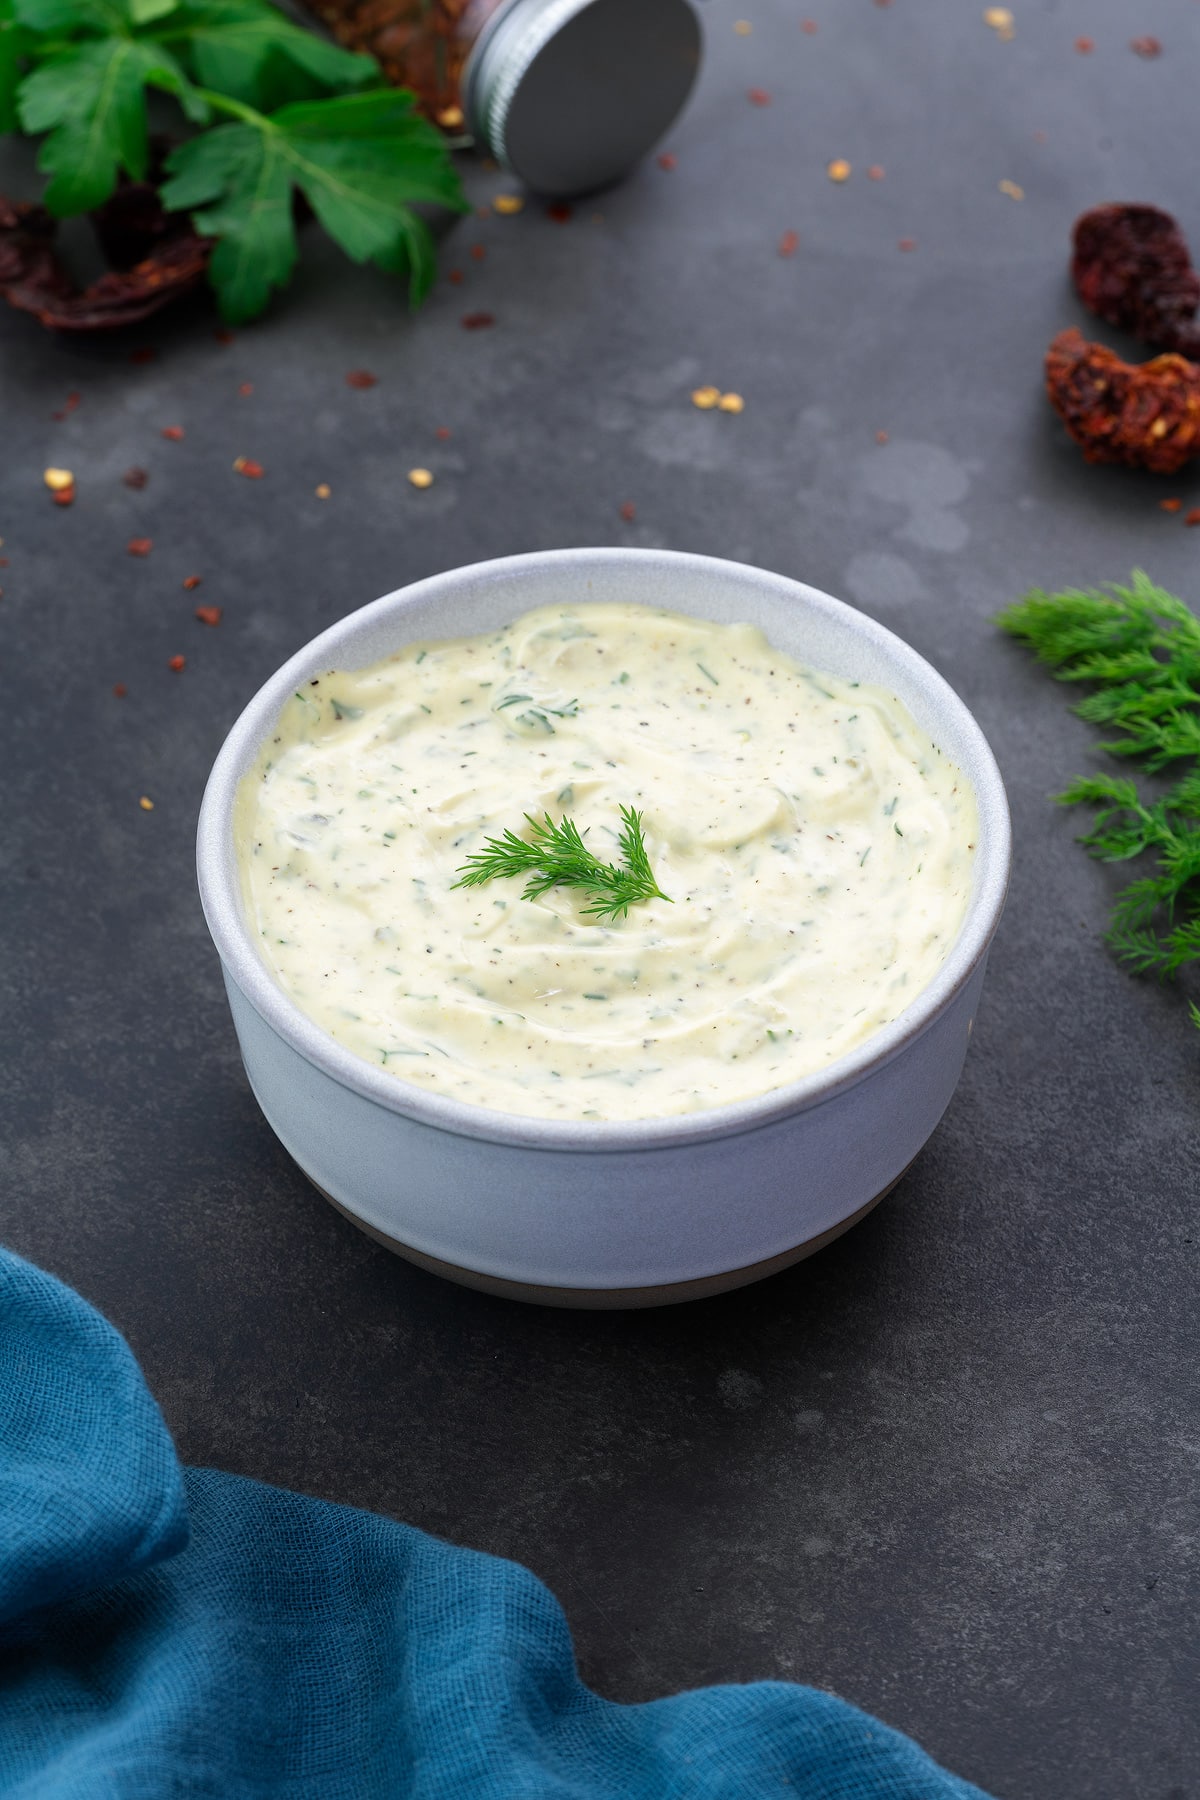 Homemade Tartar Sauce in a white bowl with few ingredients scattered around.